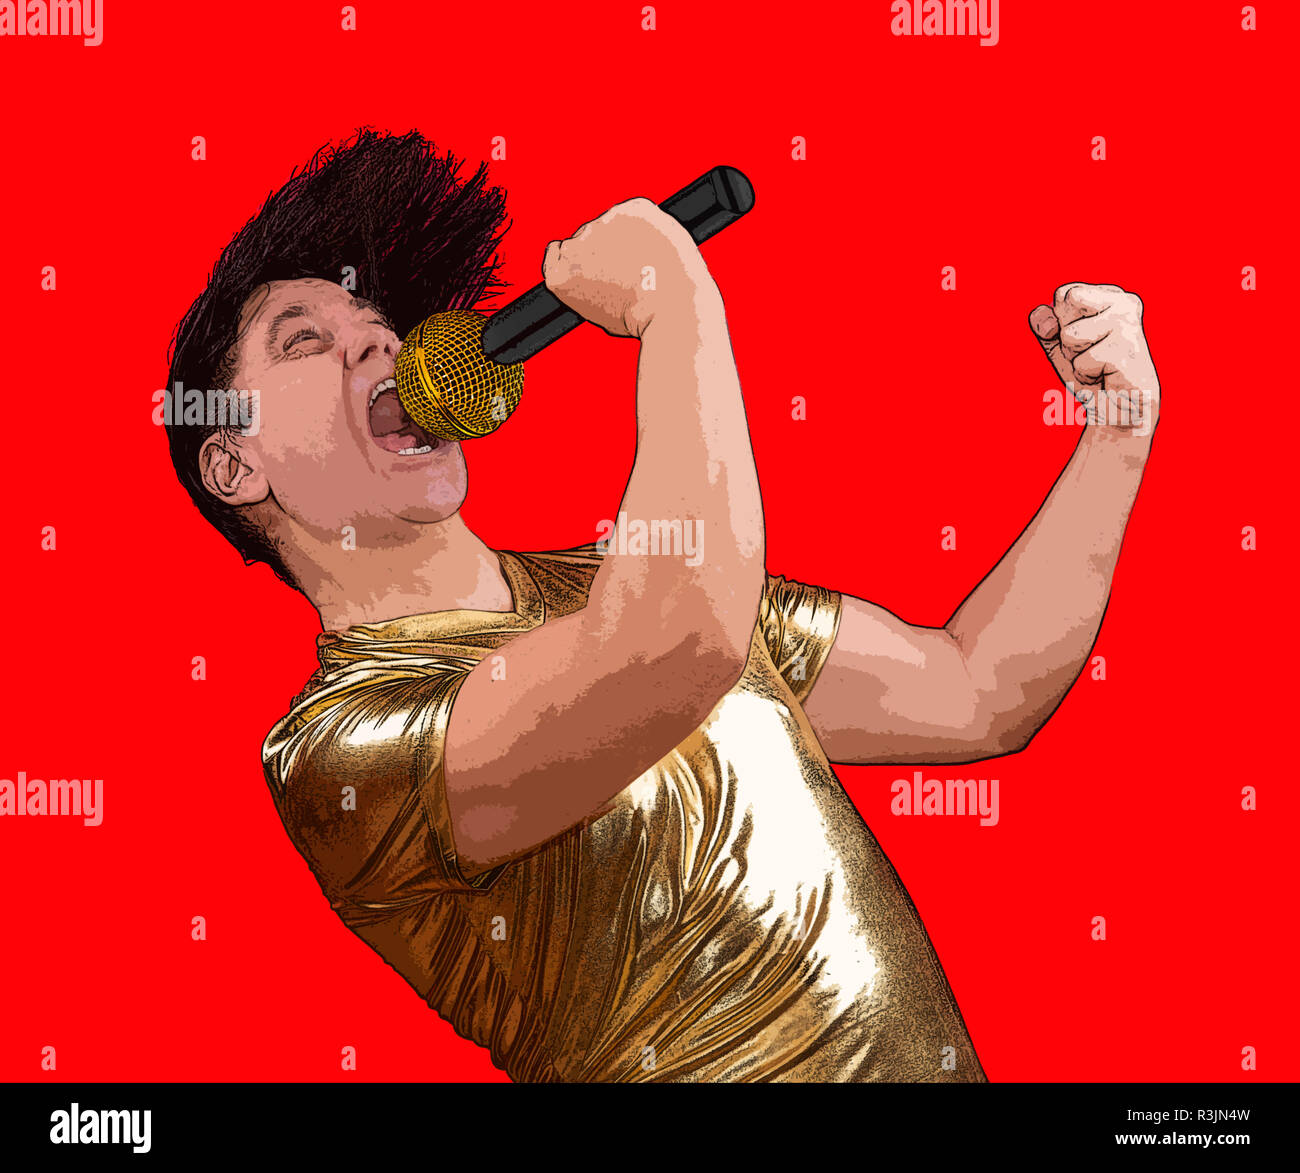 The excited singer with a microphone on red background. Crazy emotional man in golden shirt sing to mic. Stock Photo